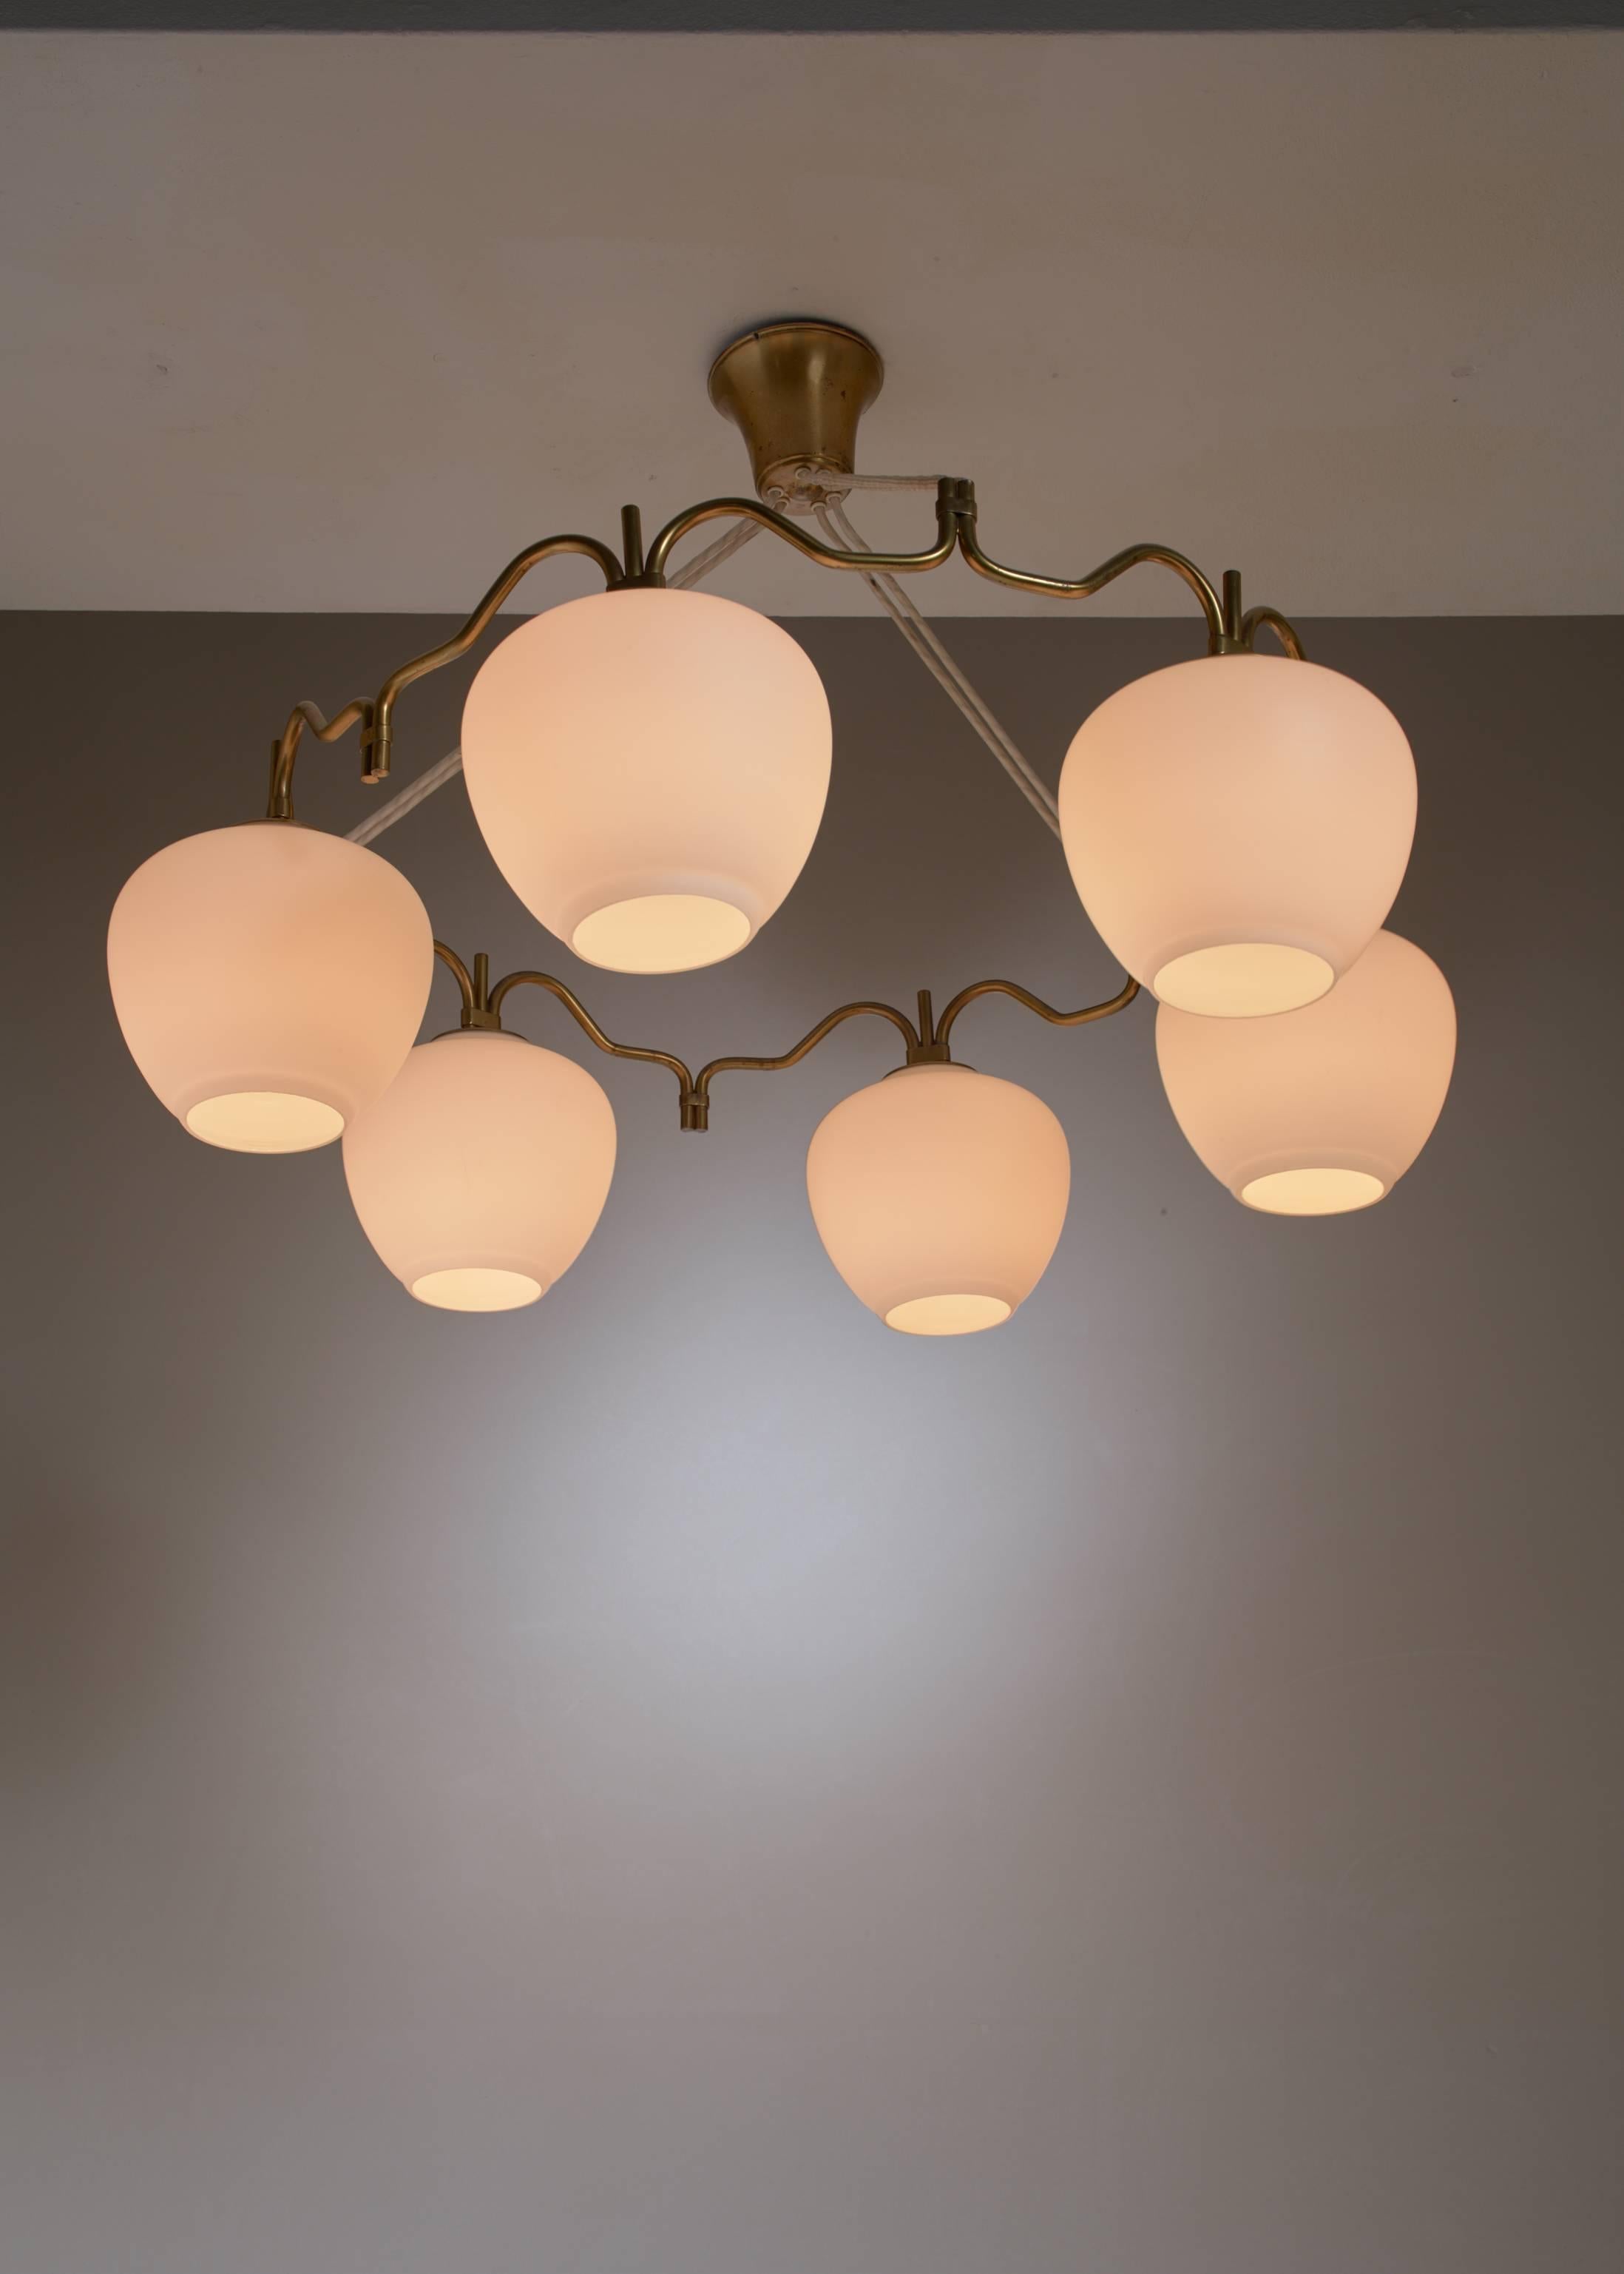 A round brass chandelier with six opaline glass shades, by Bent Karlby for Lyfa.

We have a second lamp of this model available.